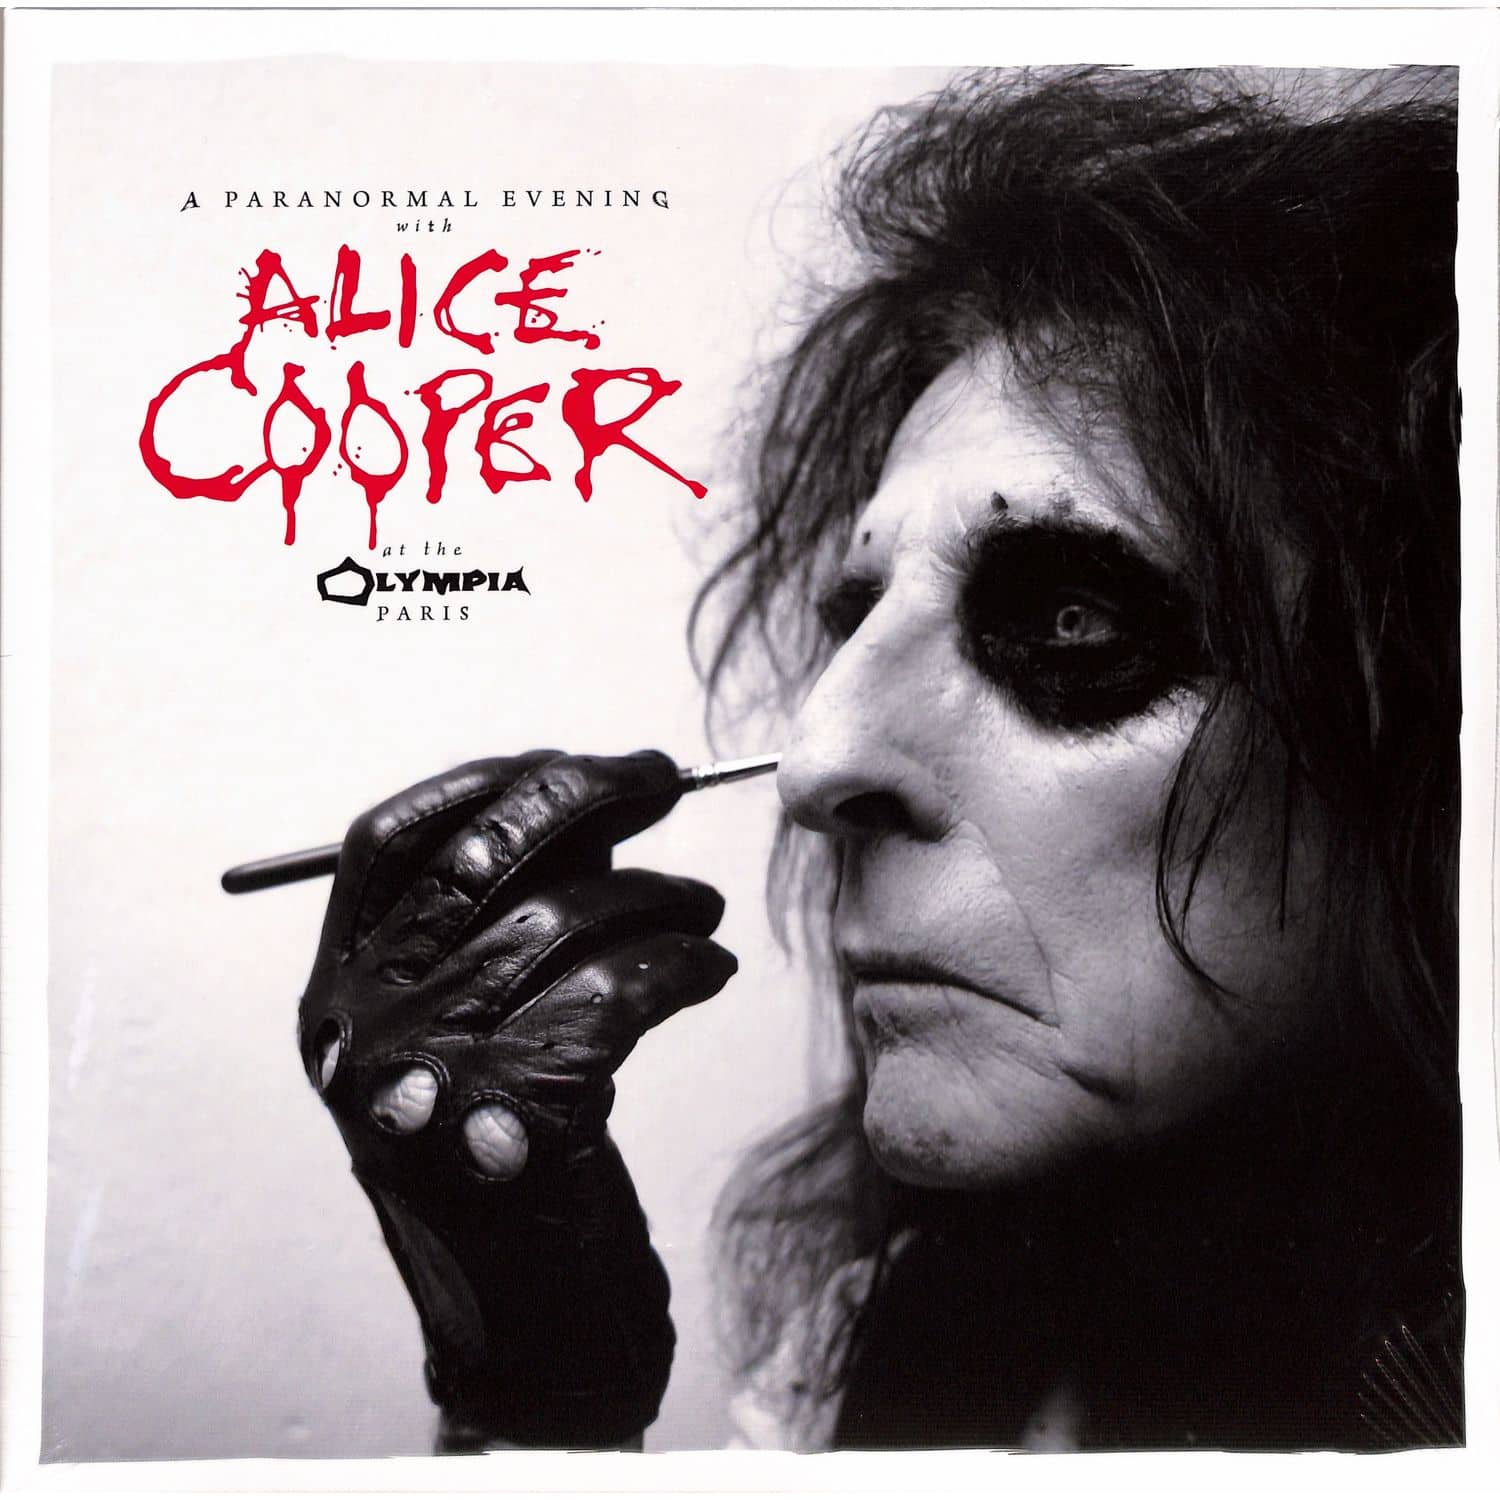 Alice Cooper - A PARANORMAL EVENING AT THE OLYMPIA PARIS 